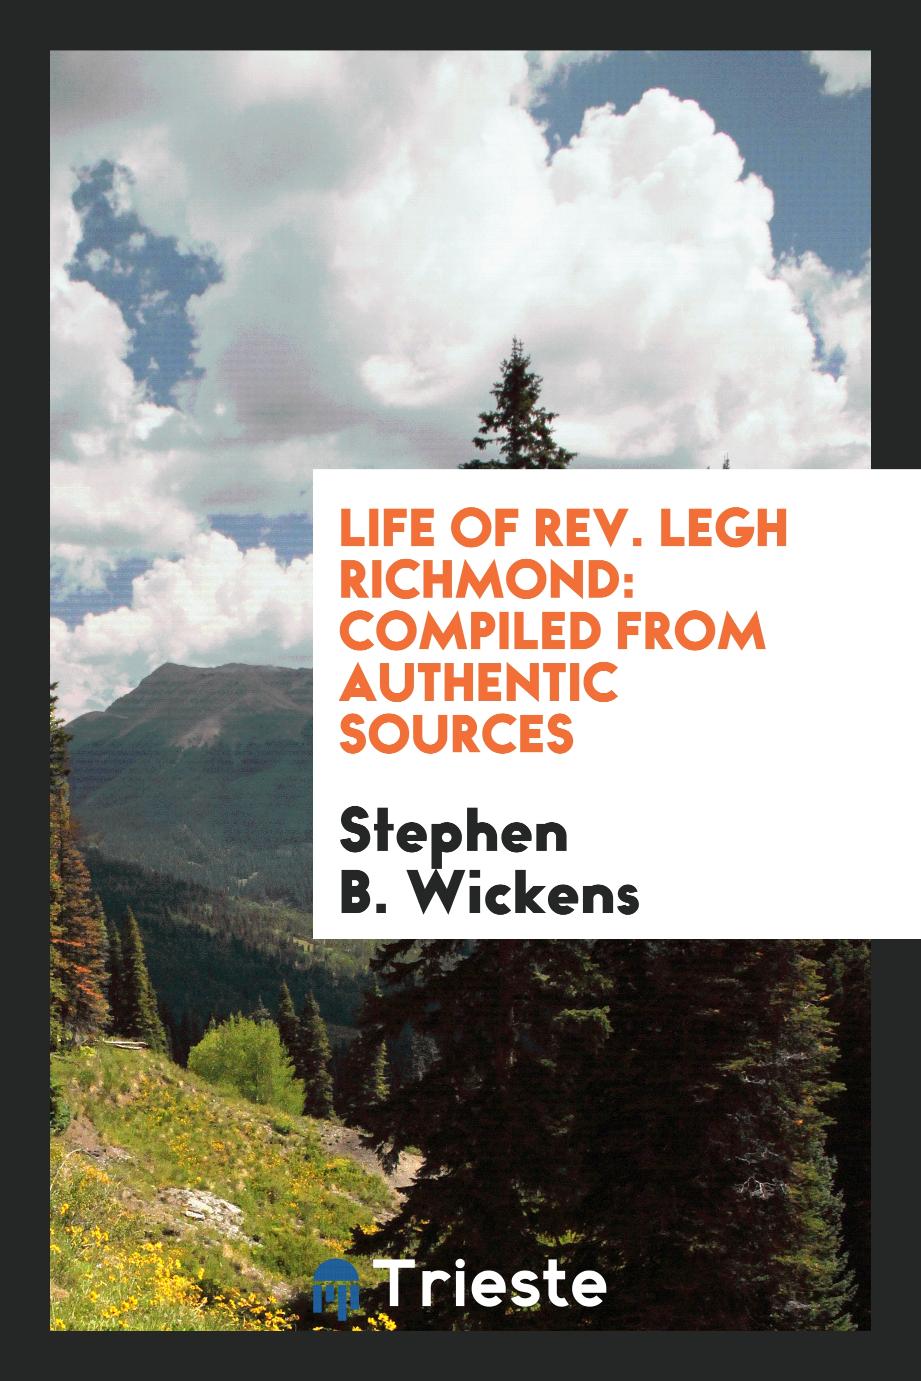 Life of Rev. Legh Richmond: Compiled from Authentic Sources